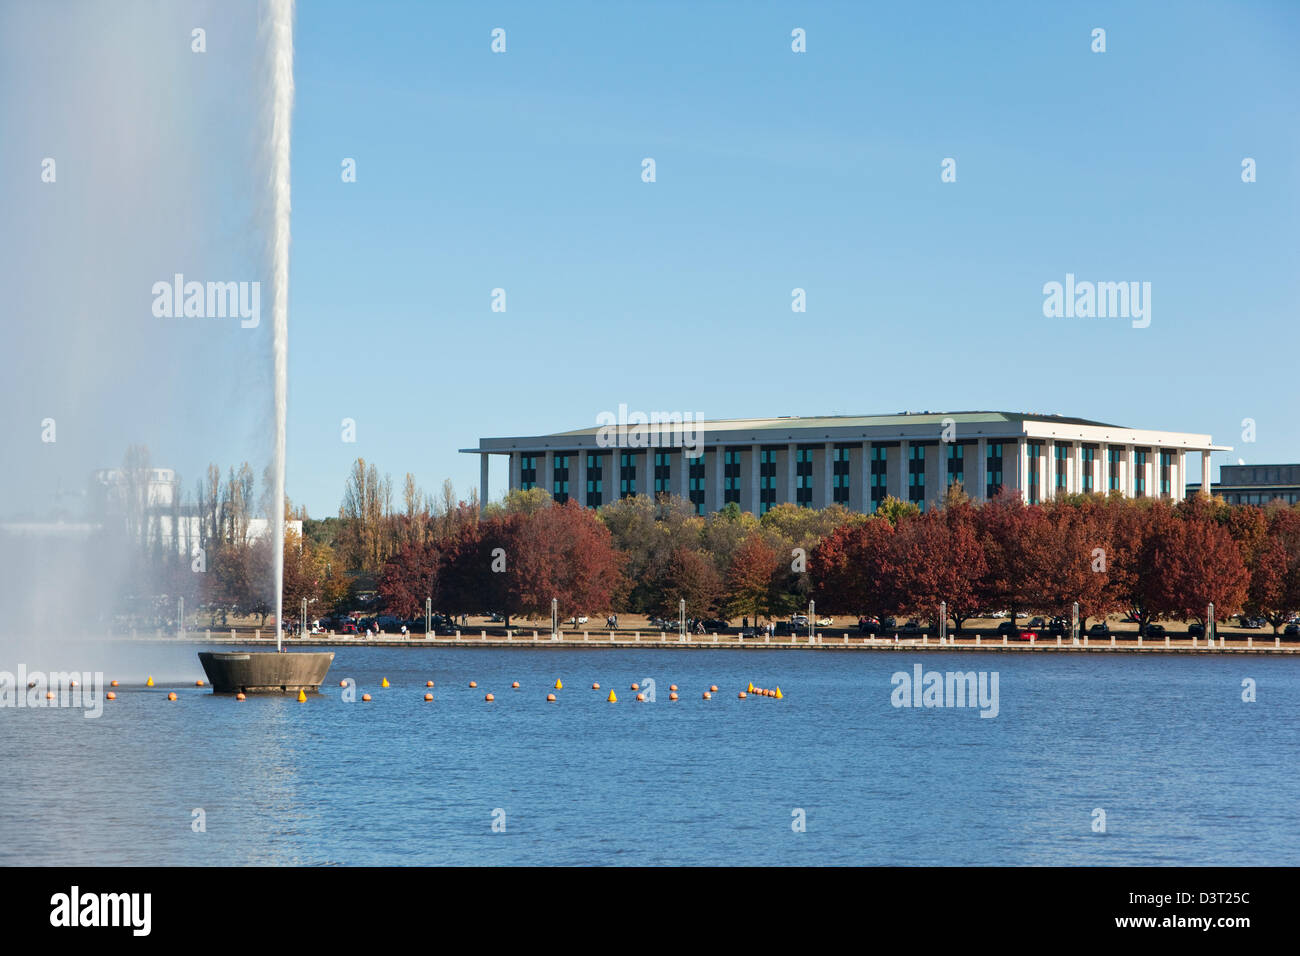 View across Lake Burley Griffin to the National Library of Australia. Canberra, Australian Capital Territory (ACT), Australia Stock Photo